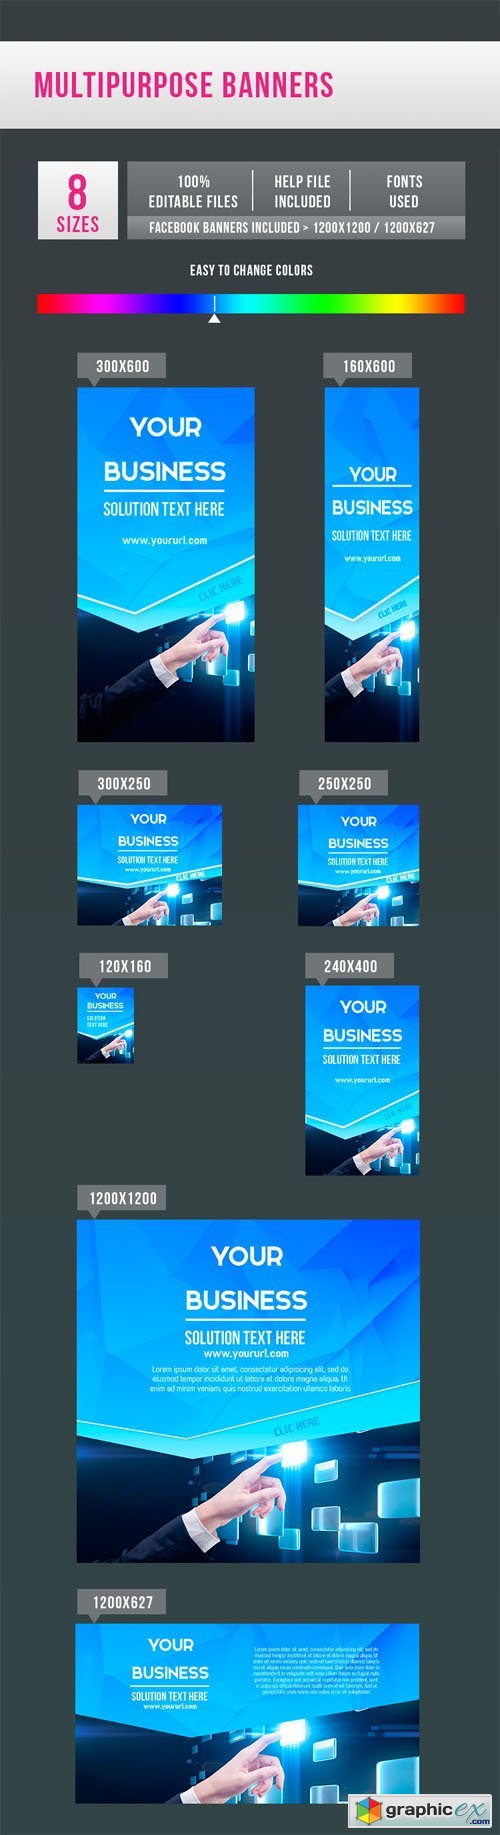 Multipurpose Banners PSD Templates